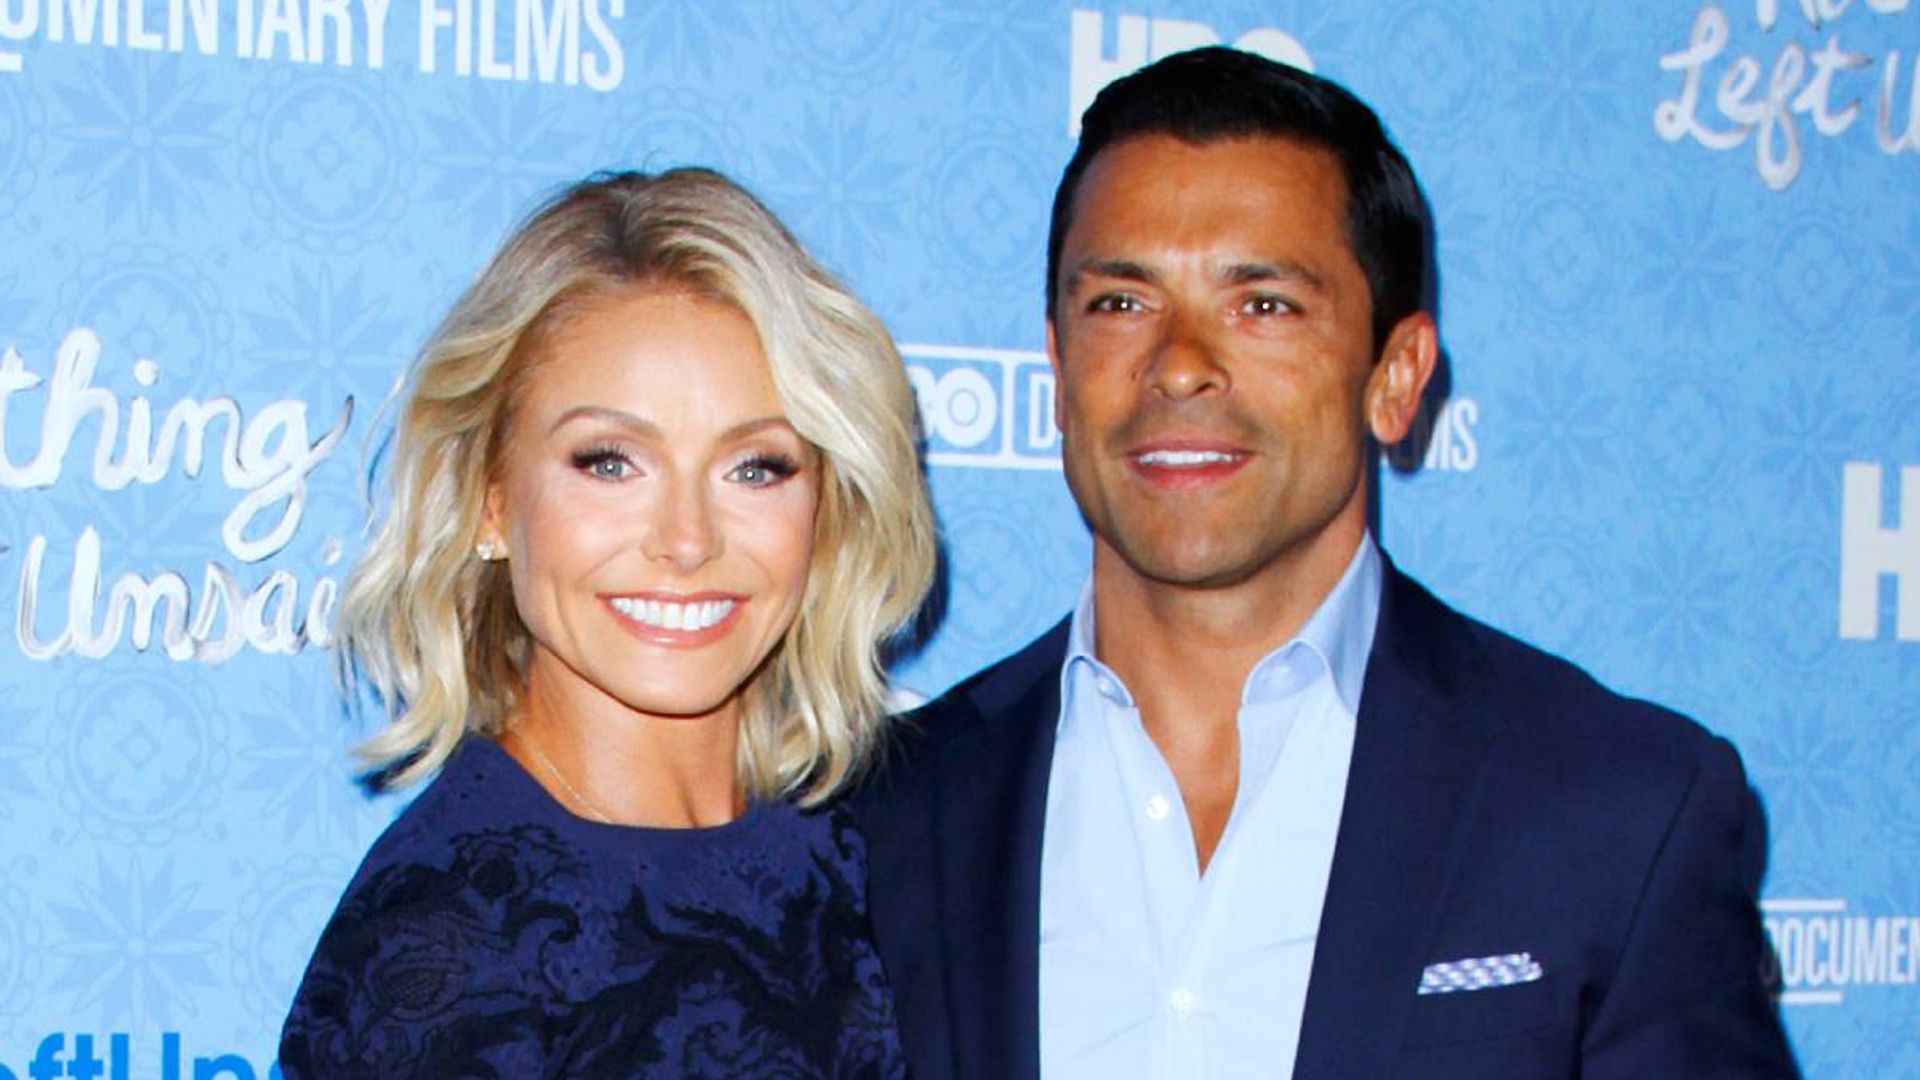 Kelly Ripa shares sweet videos of son's highly-anticipated graduation